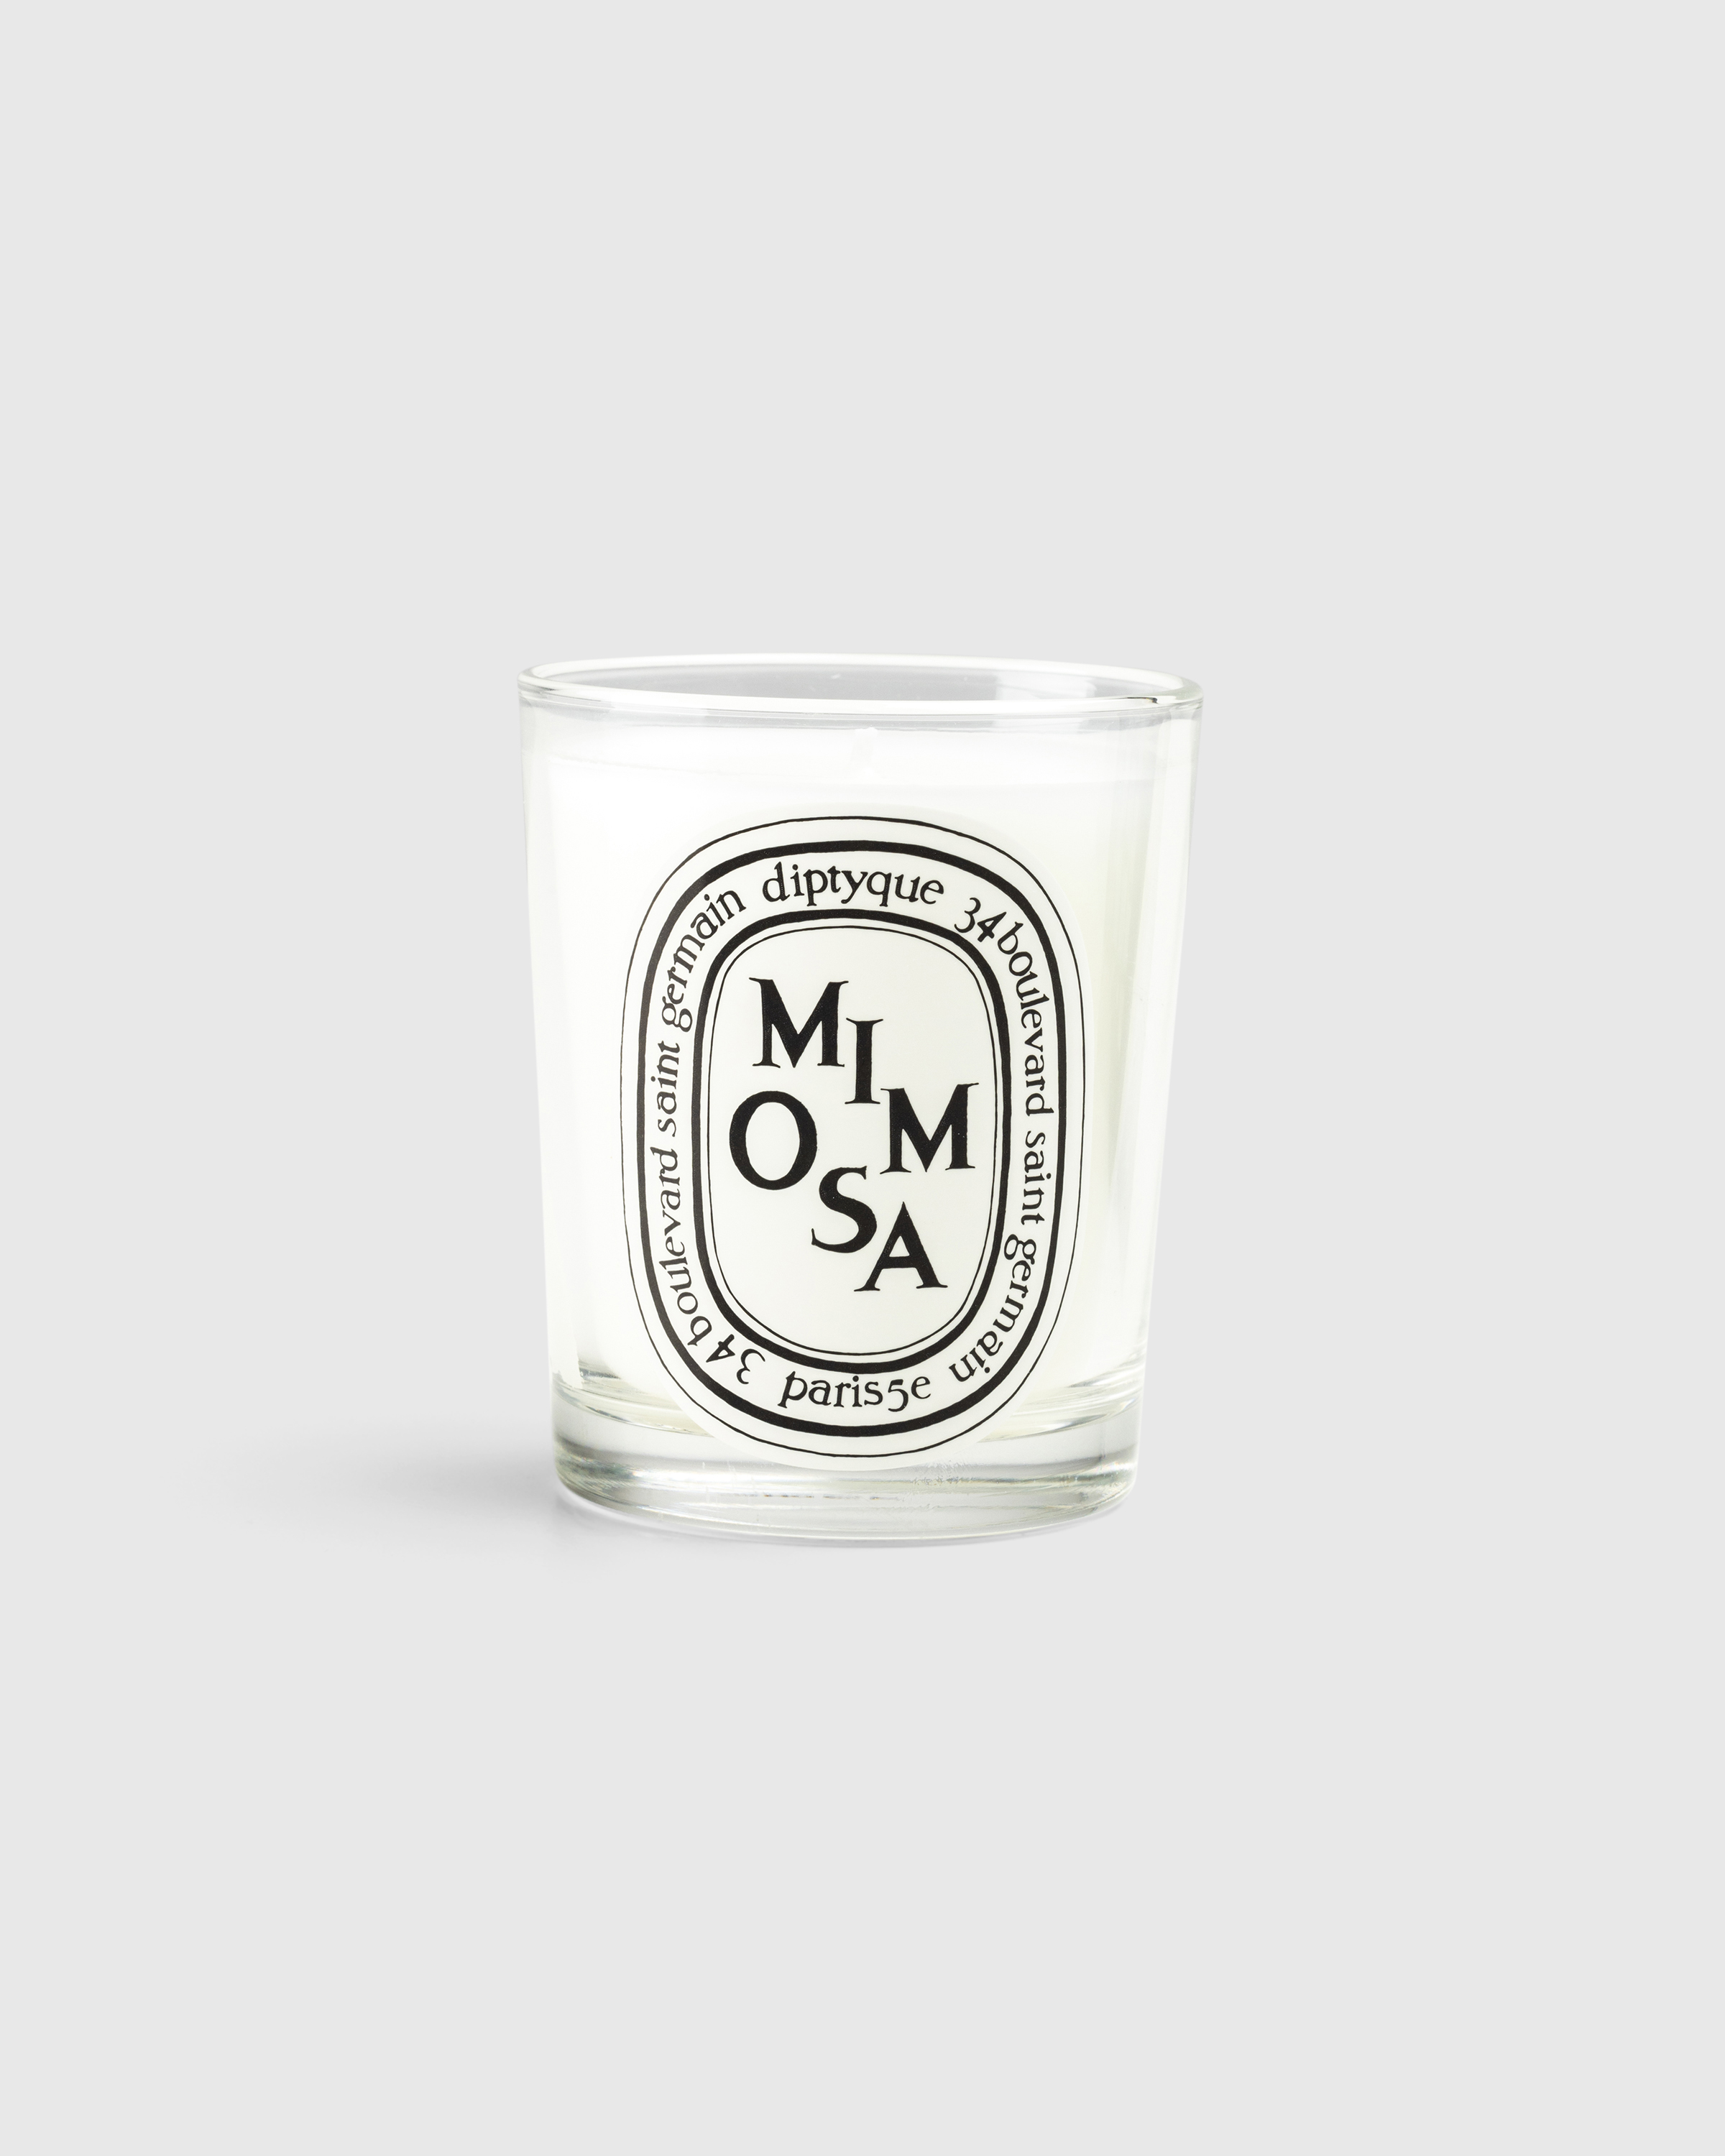 Diptyque – Standard Candle Mimosa 190g - Candles & Fragrances - White - Image 1